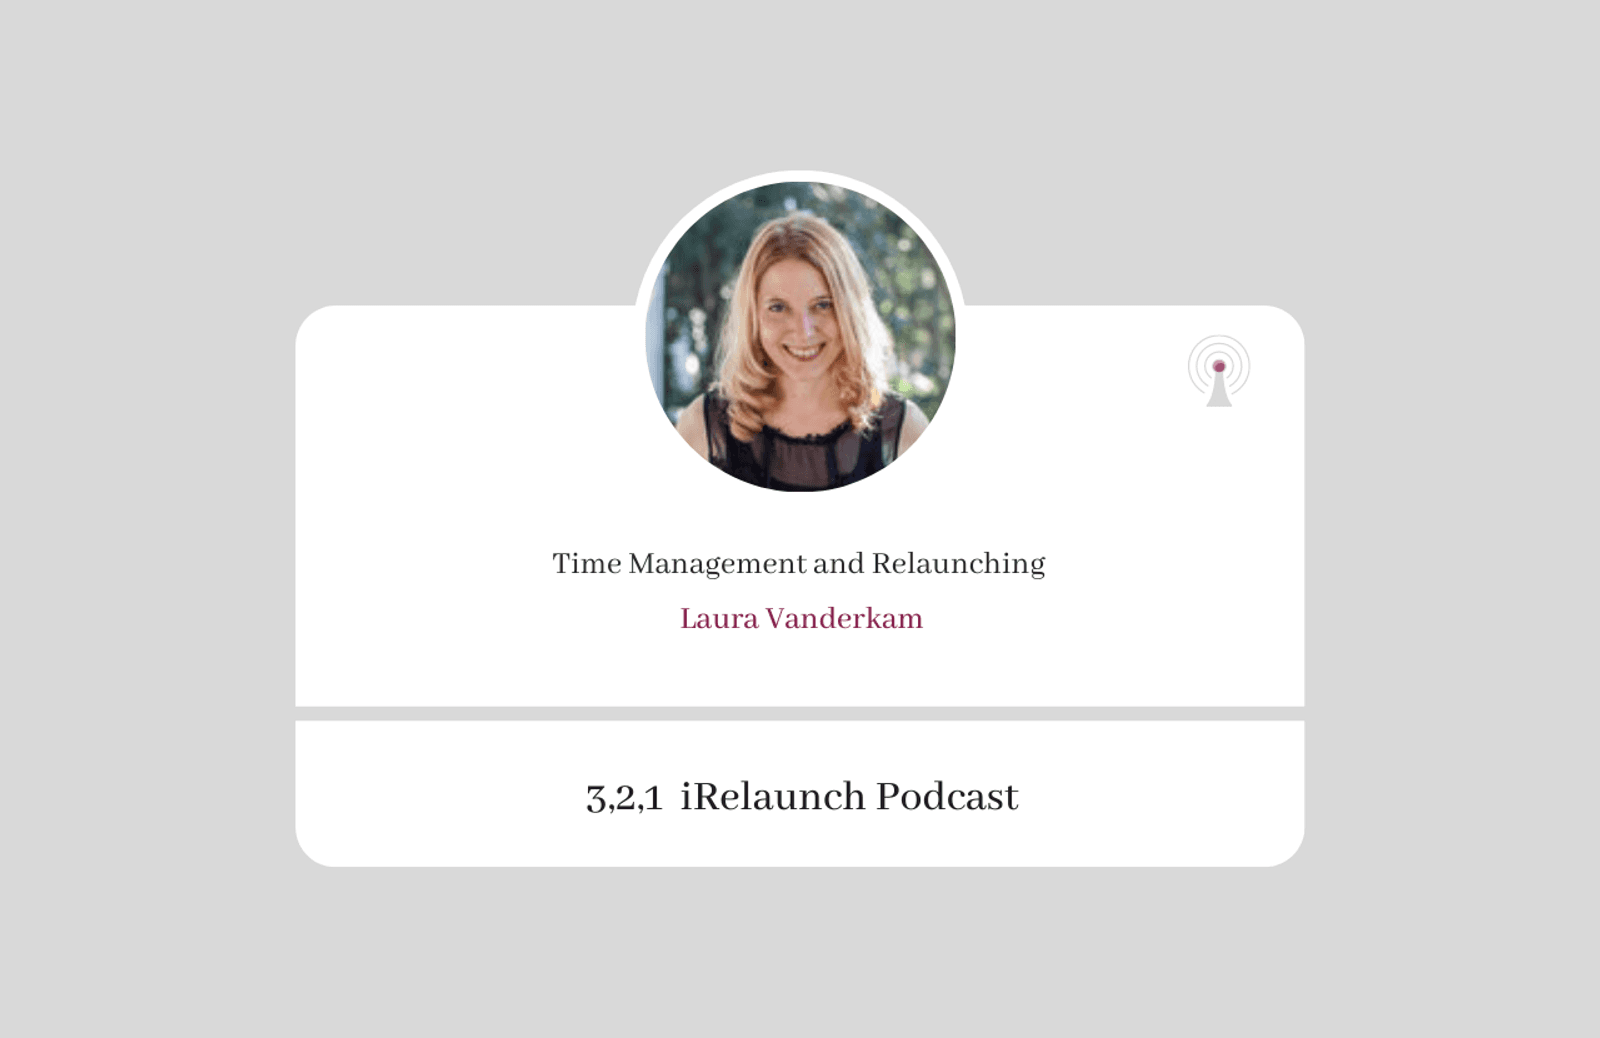 3, 2, 1 iRelaunch Podcast Thumbnail for Episode #85 with Laura Vanderkam's headshot. The episode's title is: "Time Management and Relaunching."